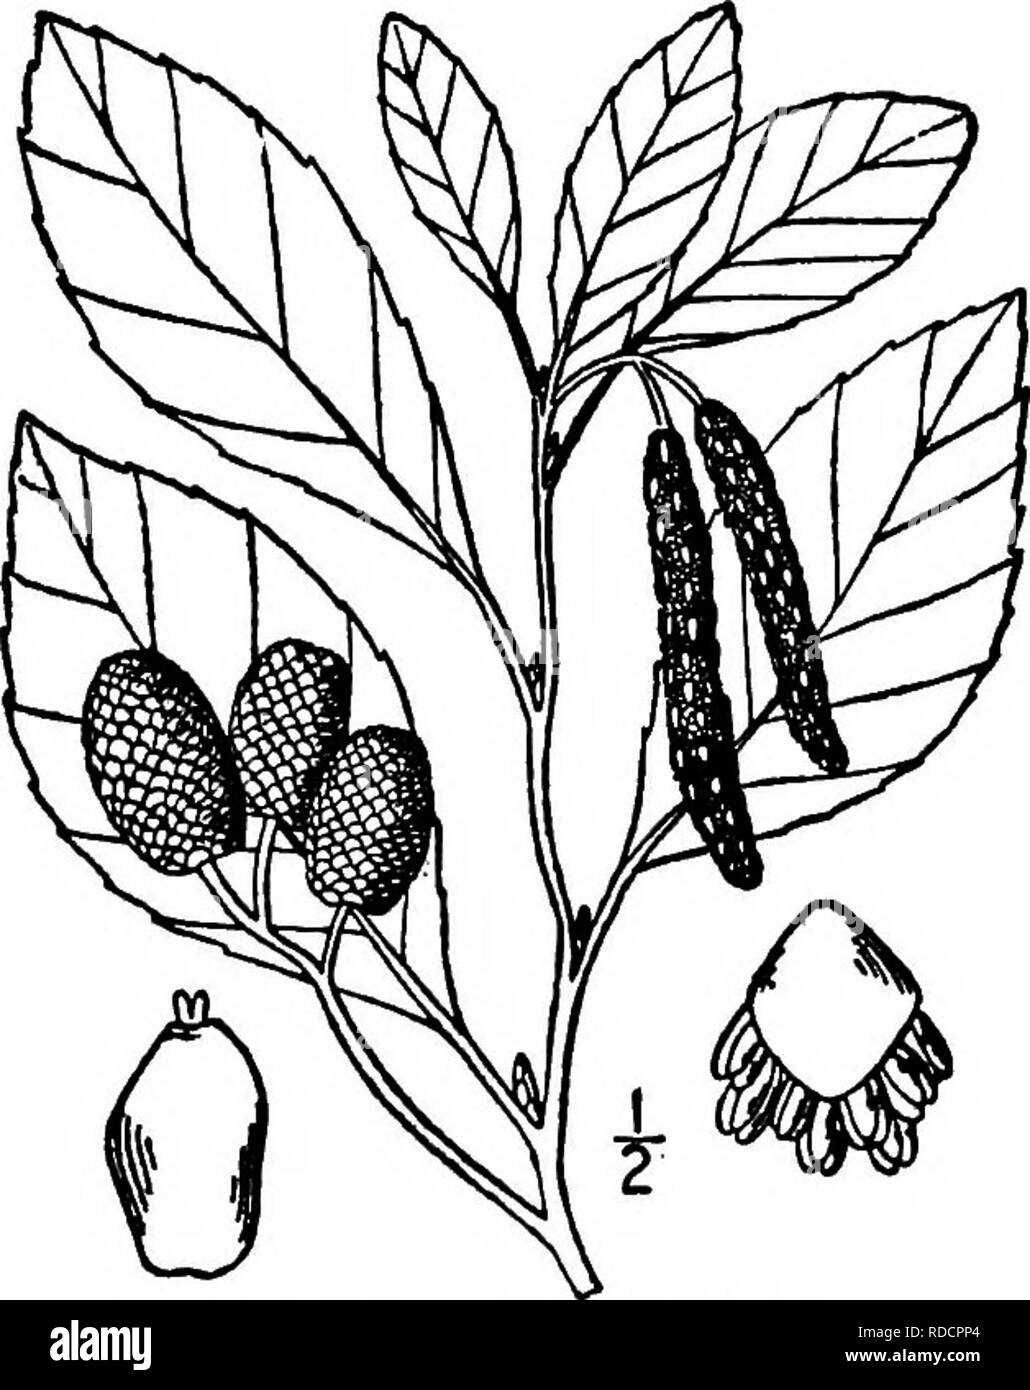 . North American trees : being descriptions and illustrations of the trees growing independently of cultivation in North America, north of Mexico and the West Indies . Trees. Seaside Alder 267 The thin, smooth bark is light brown, the young twigs green and hairy, be- coming smooth, reddish brown or gray. The buds are pointed and somewhat hairy. The leaves are mostly obovate, varying to oblong, and either blunt or pointed; they are wedge-shaped or narrowed at the base, finely toothed, 5 to 10 cm. long, firm in texture, dark green and shining above, paler, dull, and finely hairy beneath; the yel Stock Photo